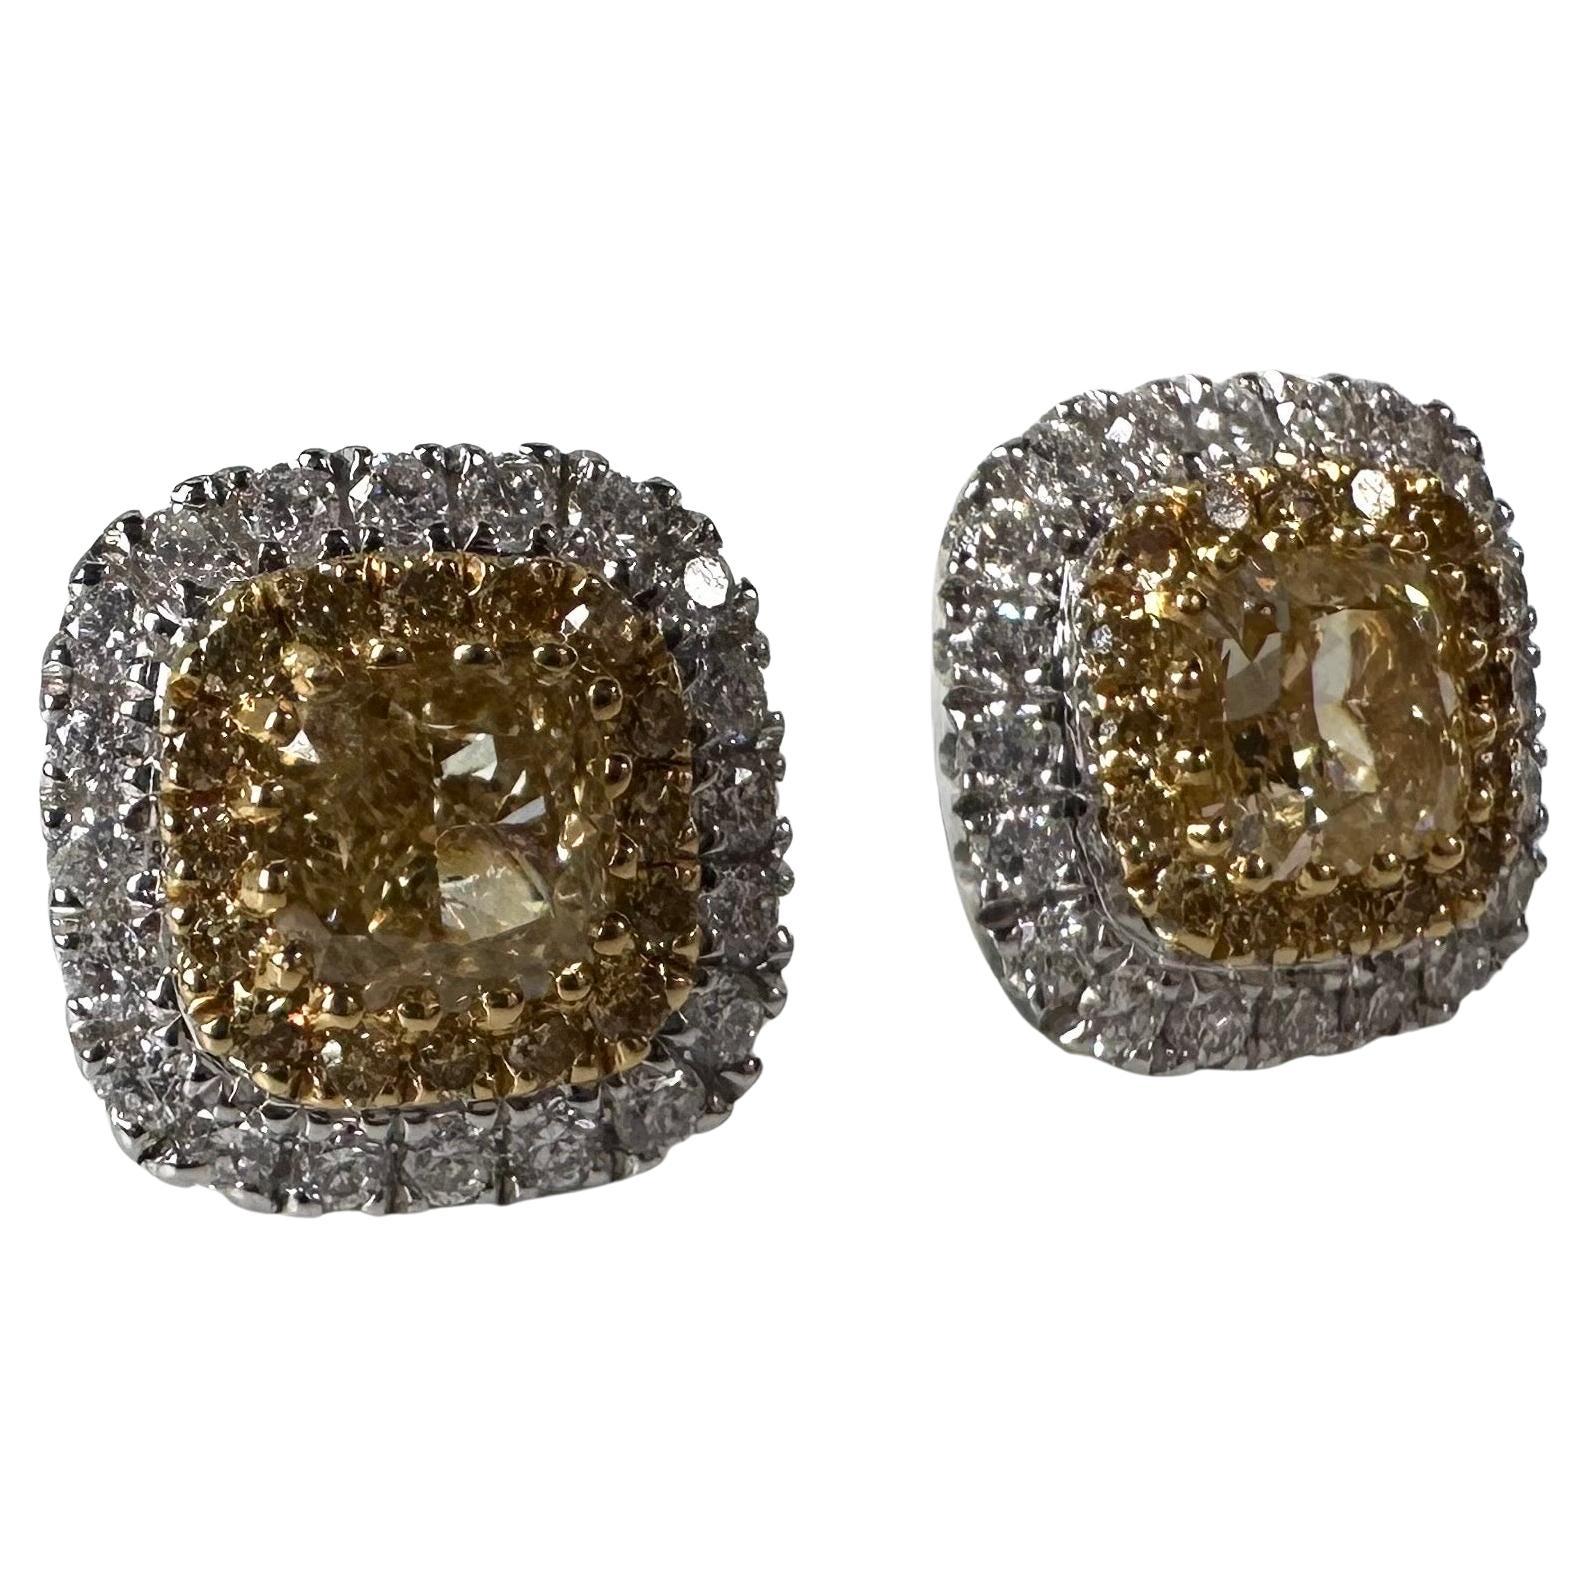 Fancy yellow diamond earrings, made with excellent craftsmanship. The double halo in fancy yellow and white diamonds style is stunning and makes the center stone look bigger and stand out! 

GOLD: 18KT gold
NATURAL DIAMOND(S)
Clarity/Color: